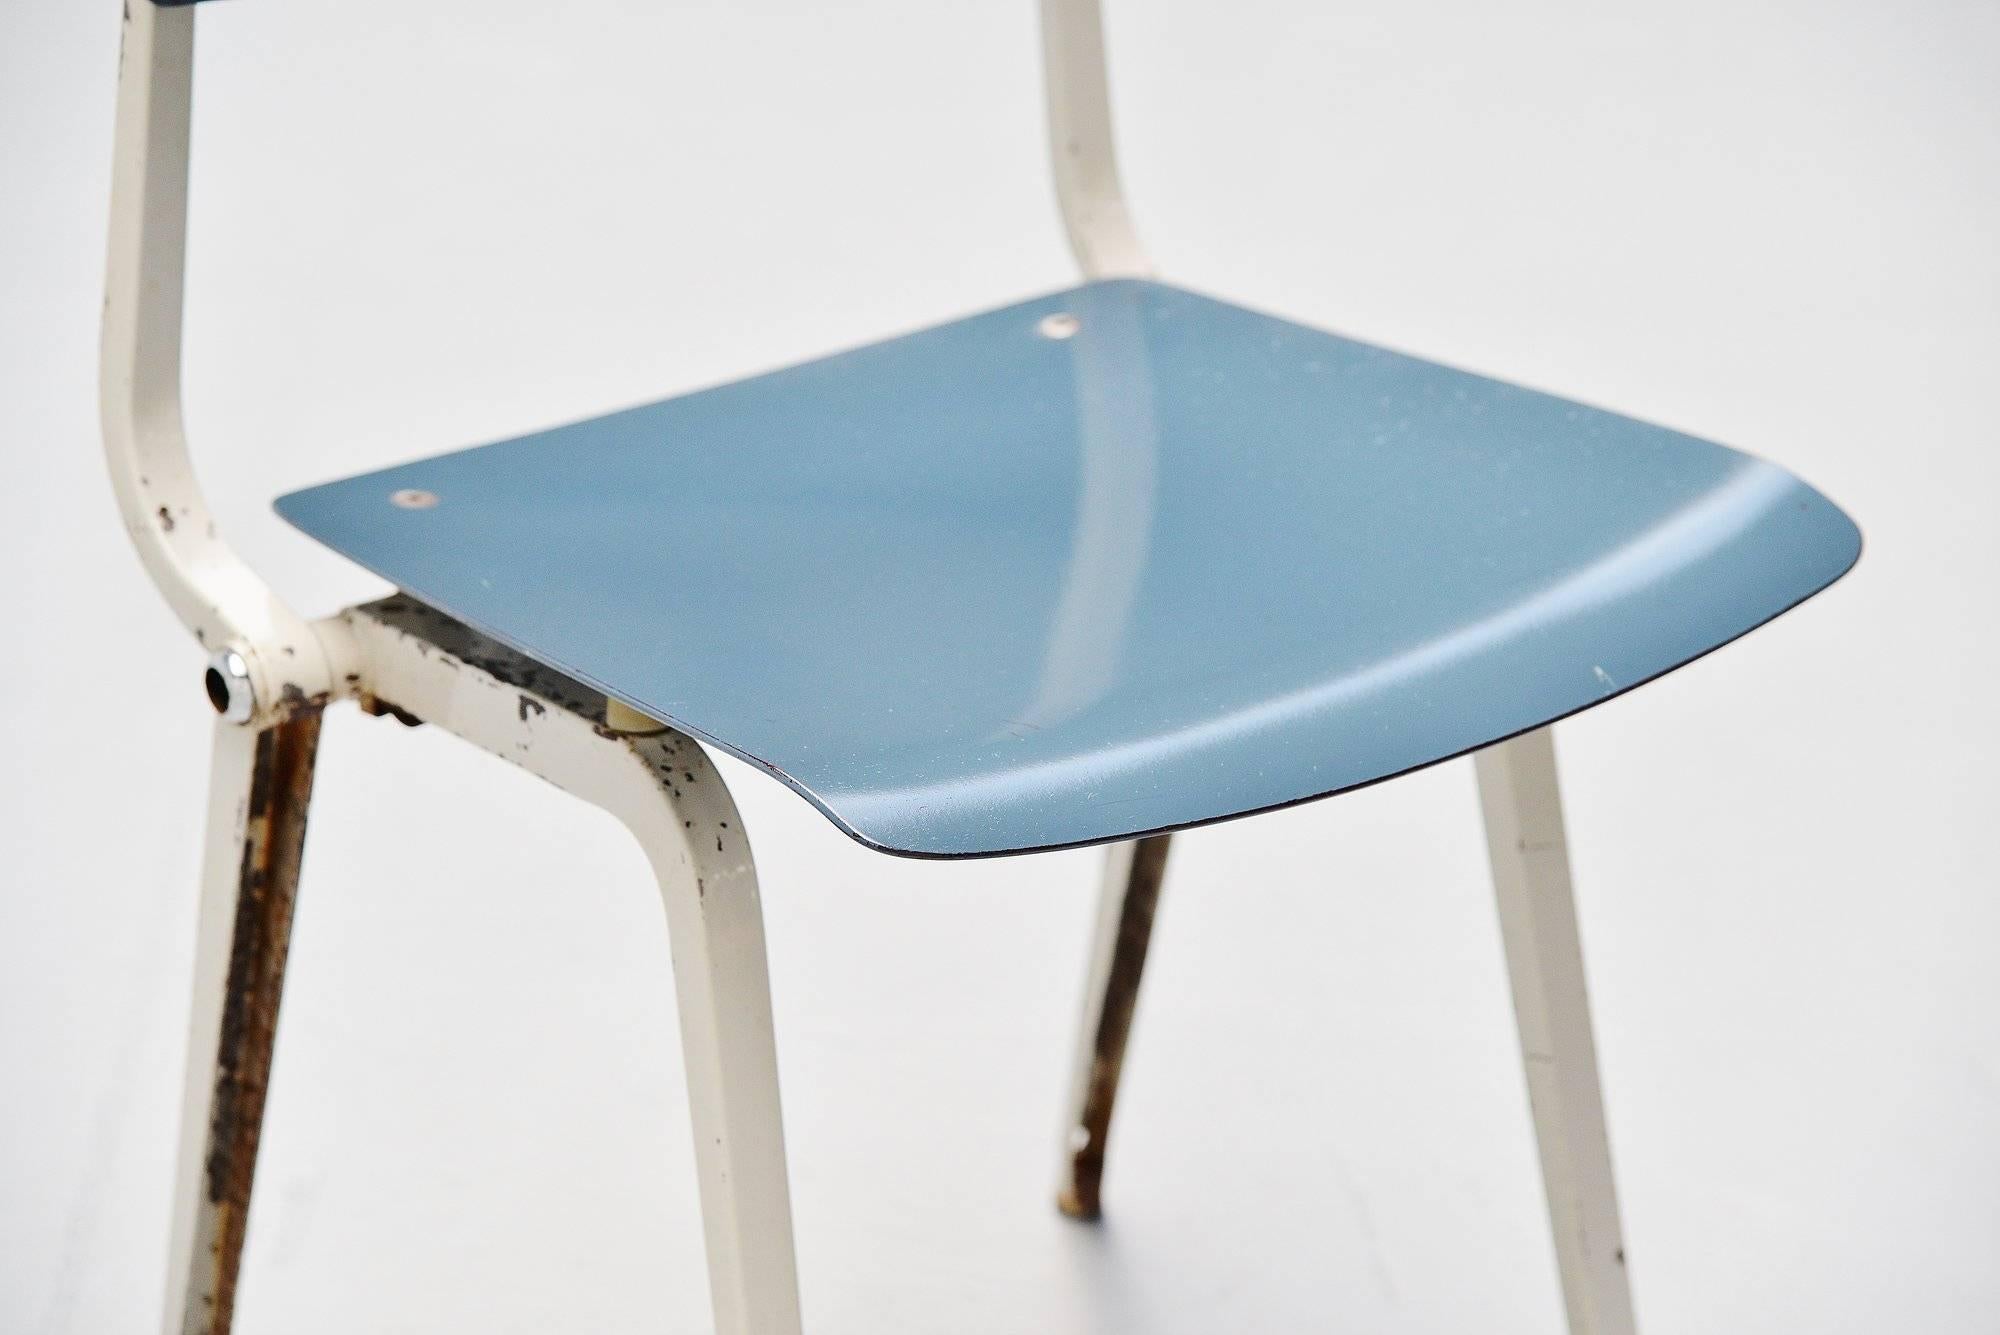 Rare Revolt folding chair designed by Friso Kramer for Ahrend de Cirkel, Holland 1953. Though the Revolt chair was already designed in 1953, the production started in 1958. The chair has a folded metal base which was very strong and a blue ciranol